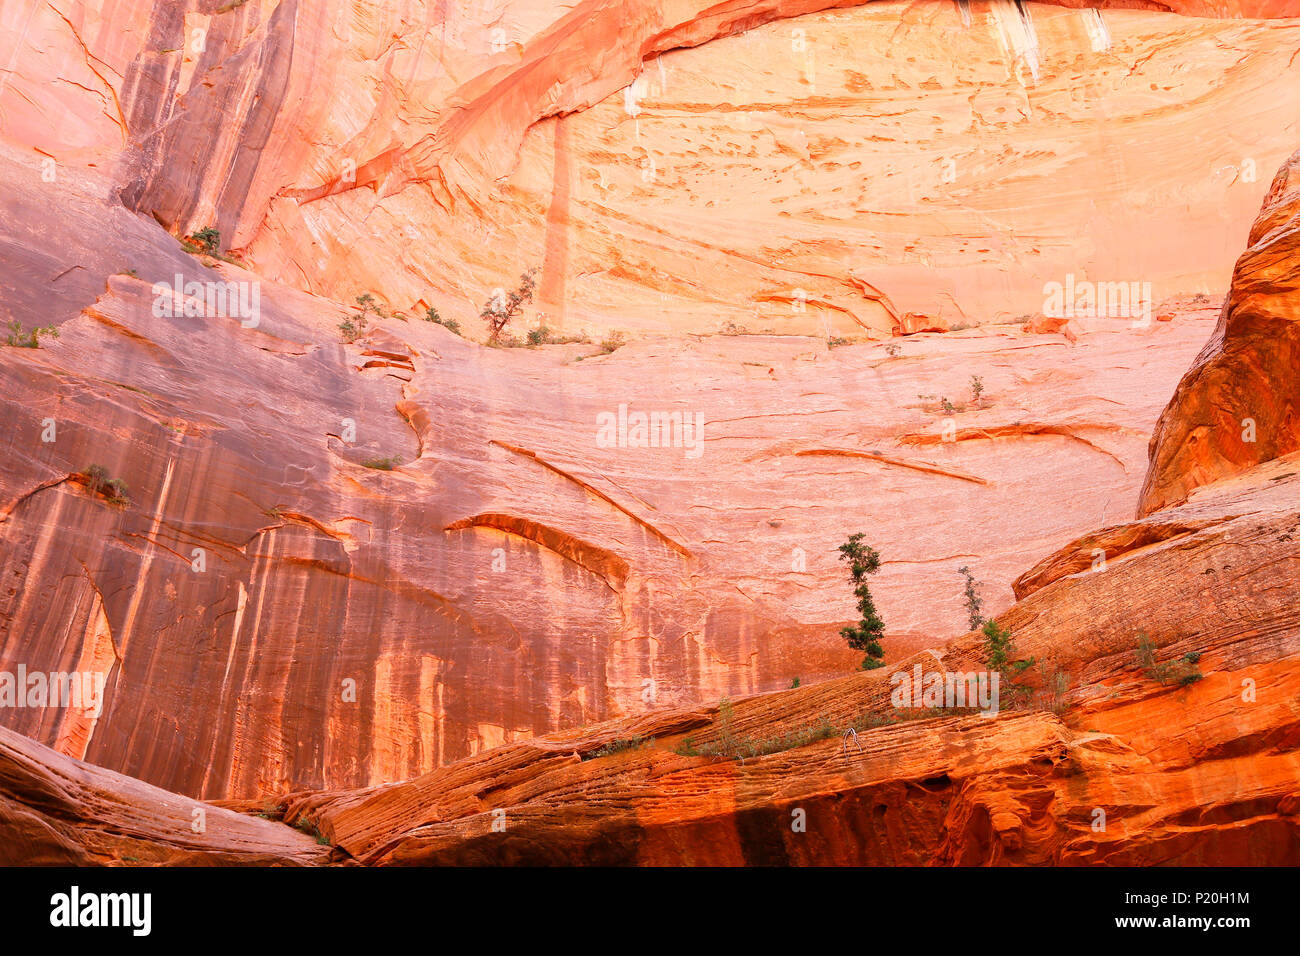 USA. Utah. Zion National Park. Zion Kolob. Canyon. Taylor Creek. Double Arch Alcove. The trees hanging on the wall. Stock Photo